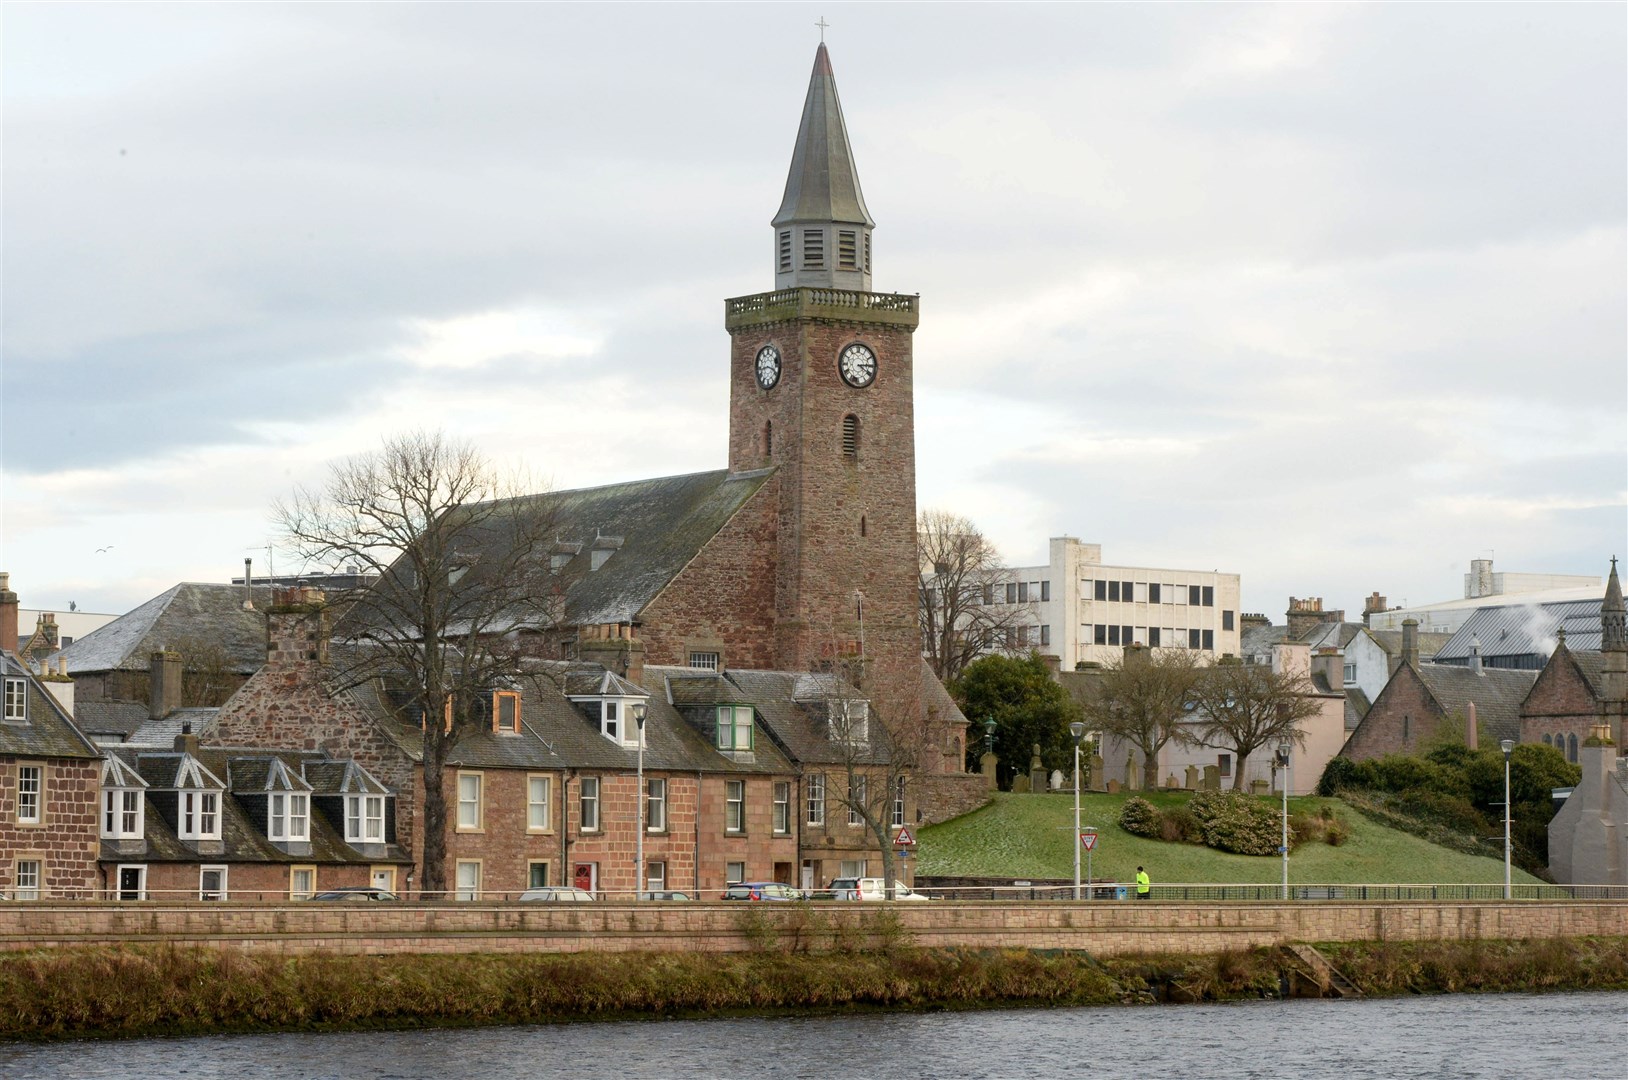 The Old High Church is a distinctive landmark on the riverside in Inverness.